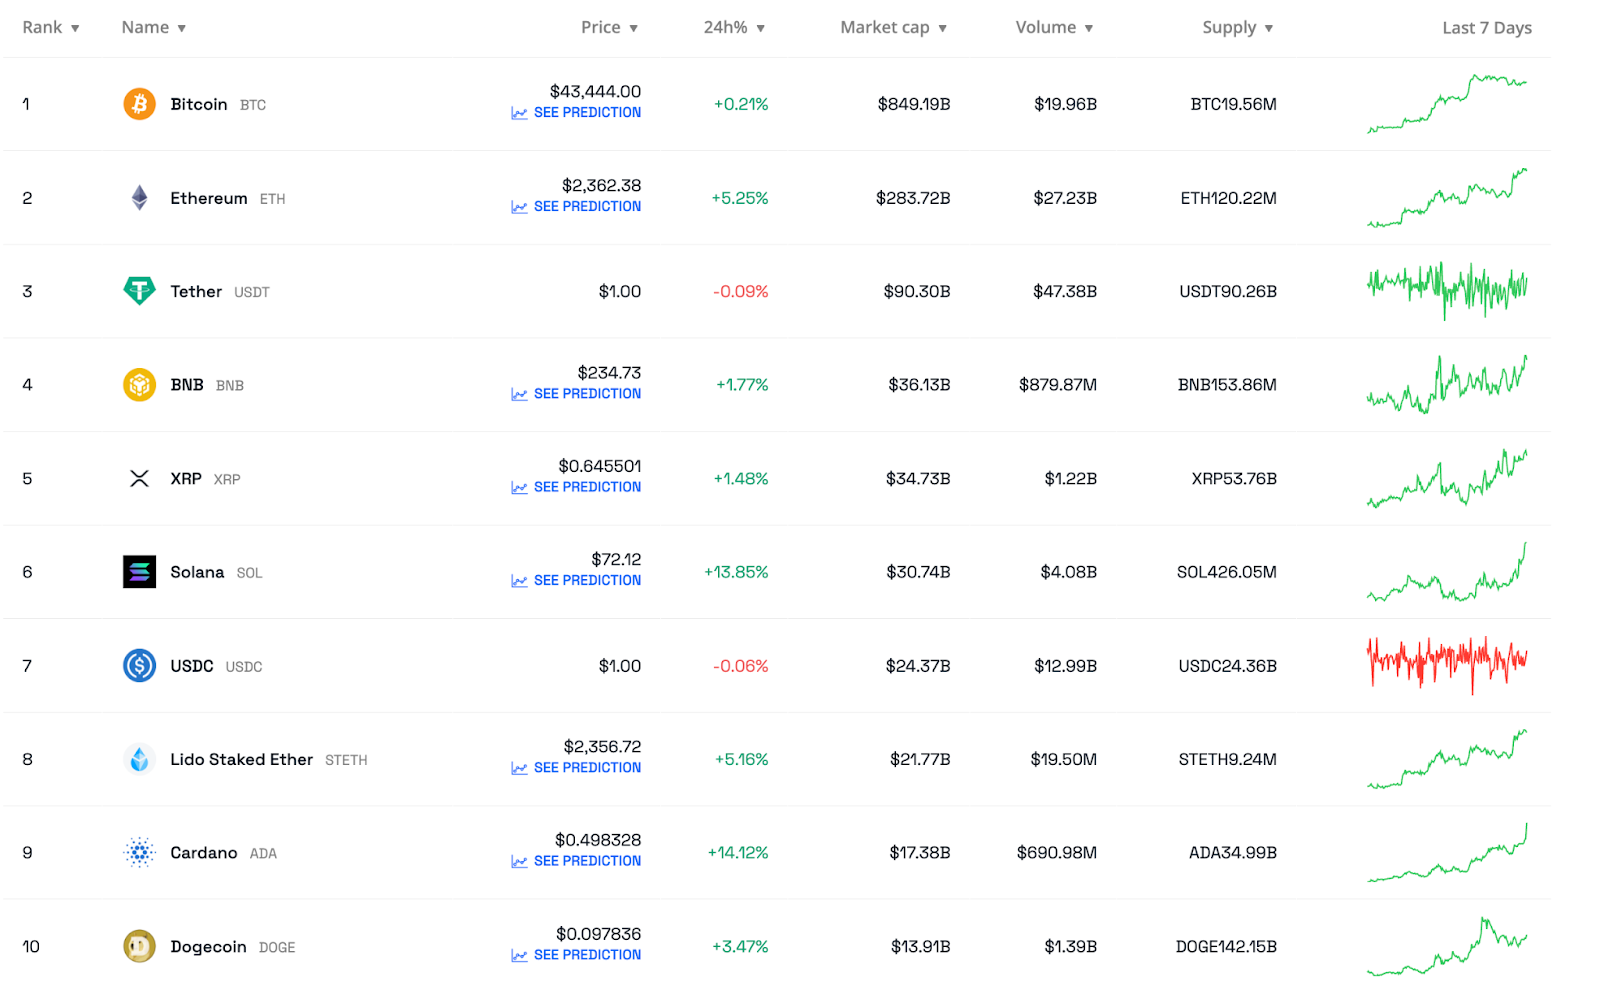 Top 10 crypto based on market capitalization. Source: BeInCrypto